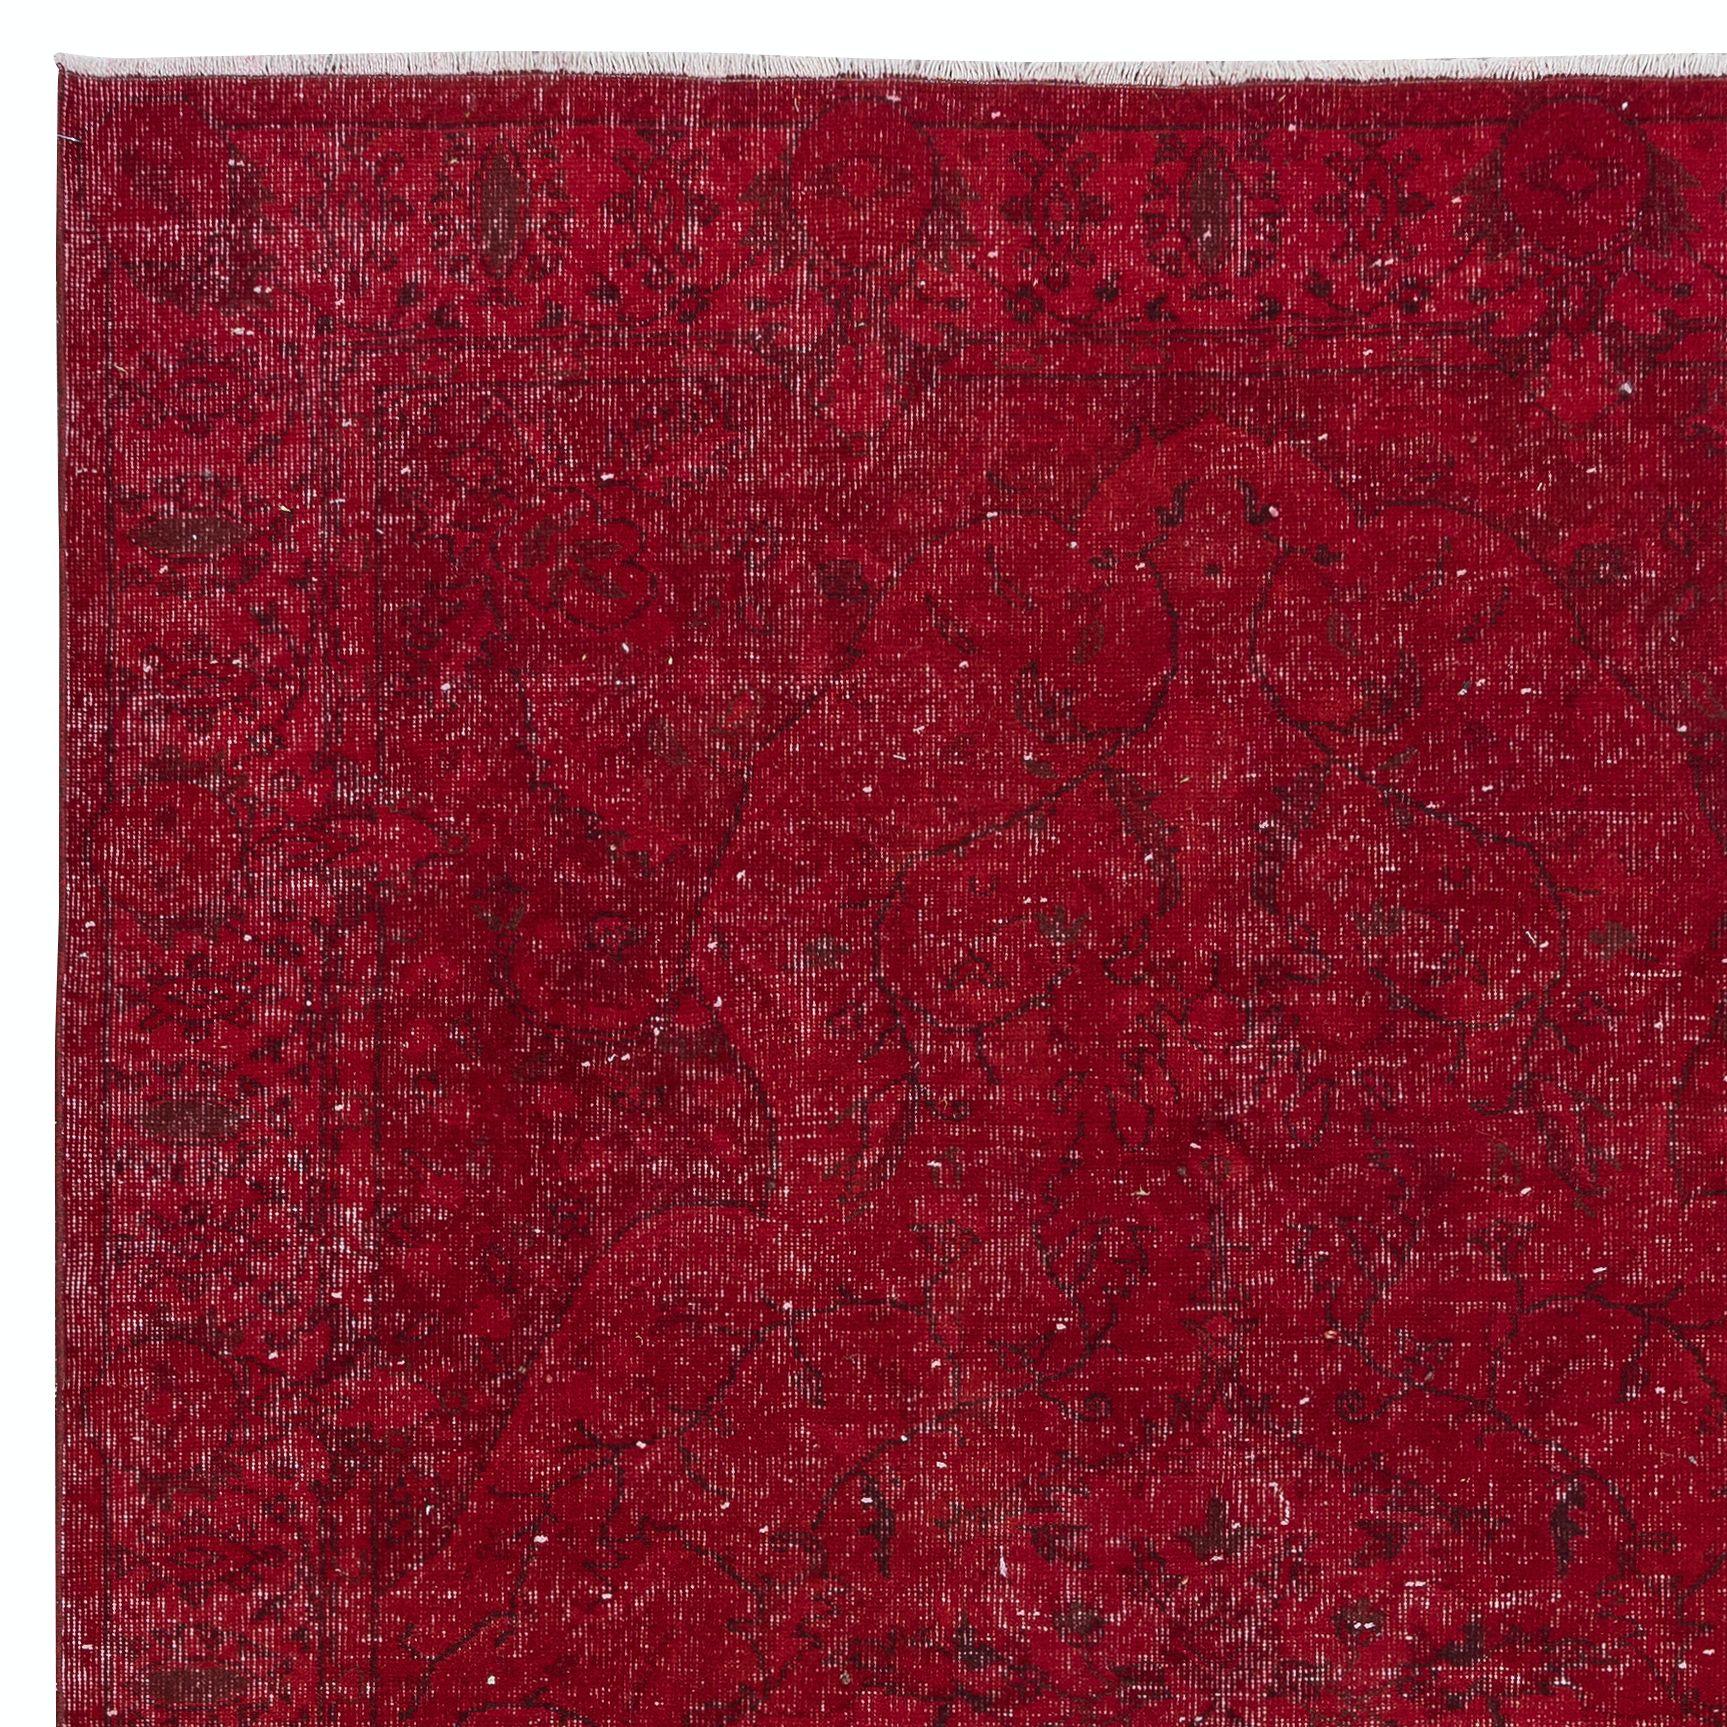 Hand-Woven 6x9.8 Ft One-of-a-Kind Red Wool Area Rug, Room Size Handmade Turkish Carpet For Sale